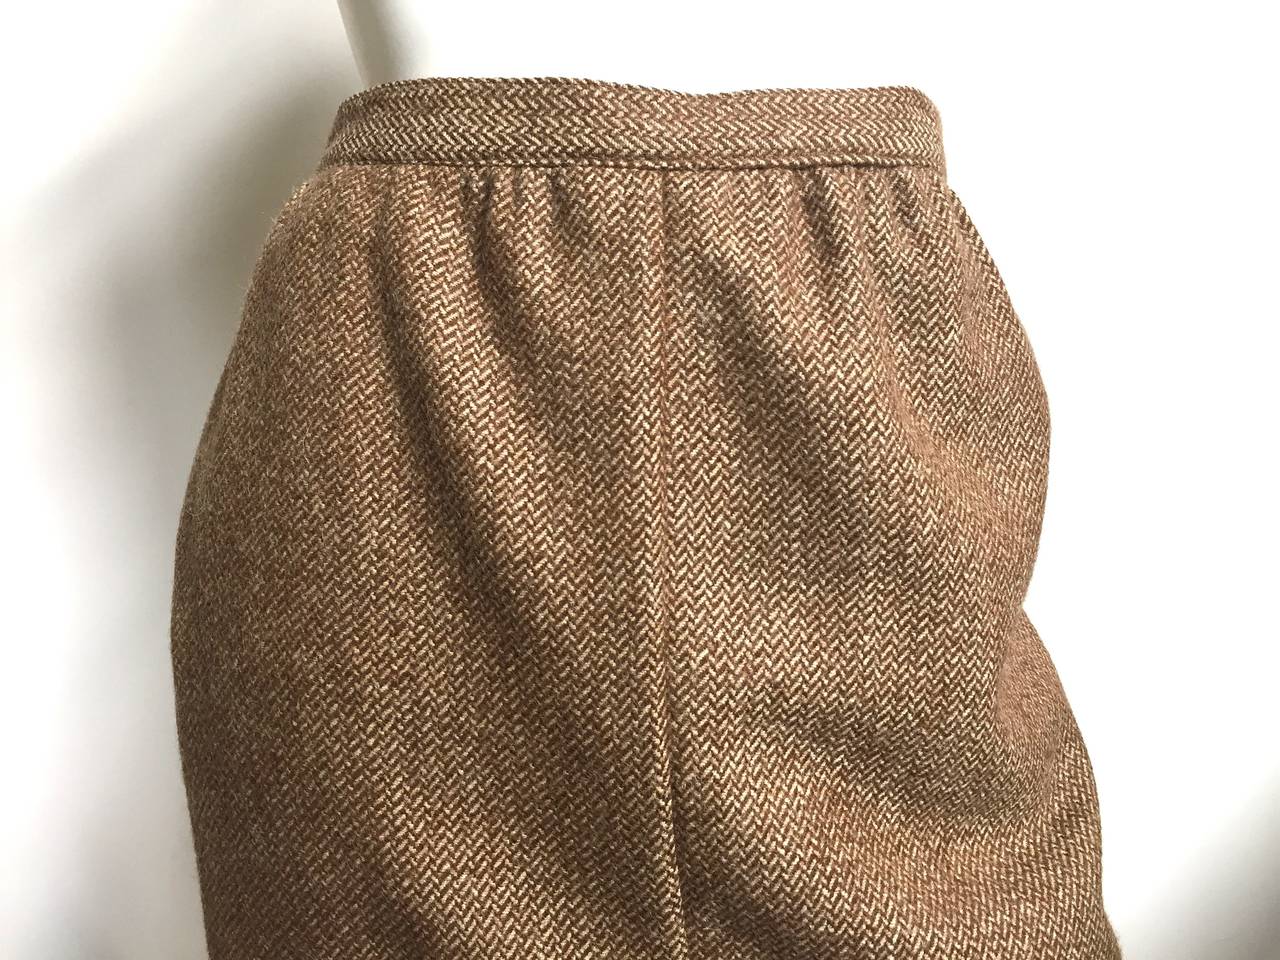 Vintage classic Calvin Klein 1980s wool herringbone pattern with pockets is a size 10. Calvin Klein vintage is always classic & timeless, never dated or goes out of style. This skirt is lined.
Measurements are:
32